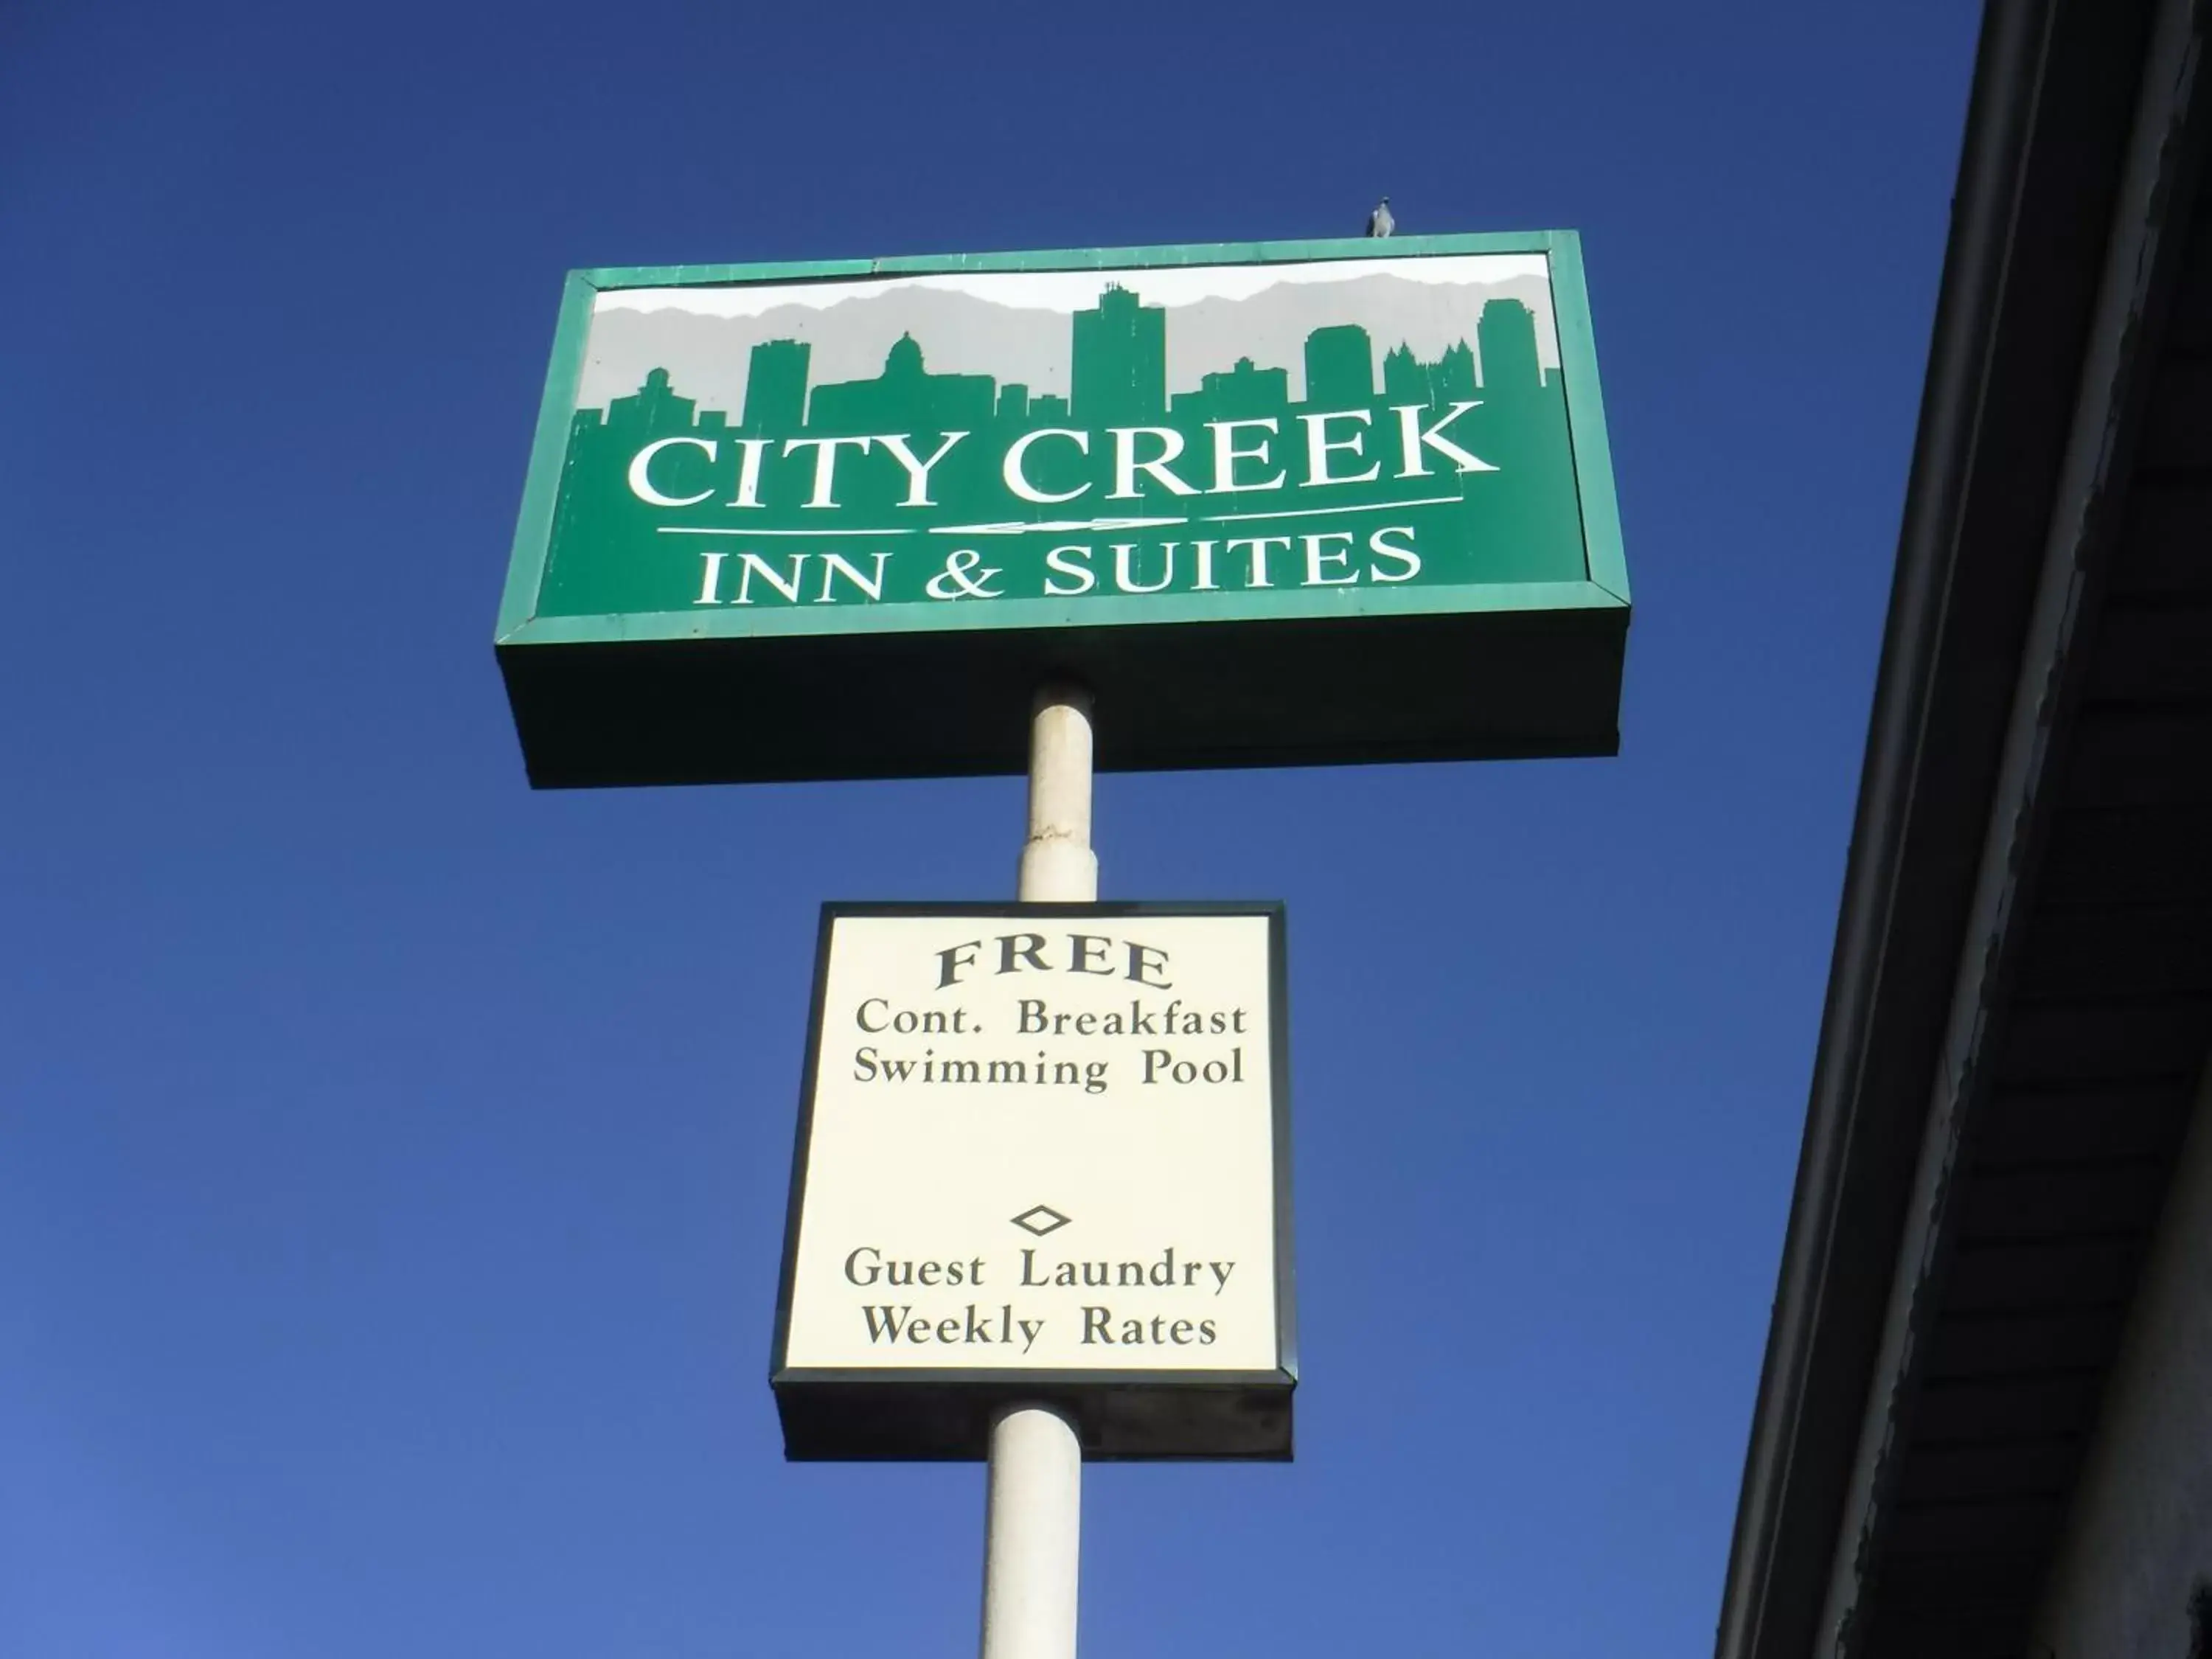 Property logo or sign in City Creek Inn & Suites